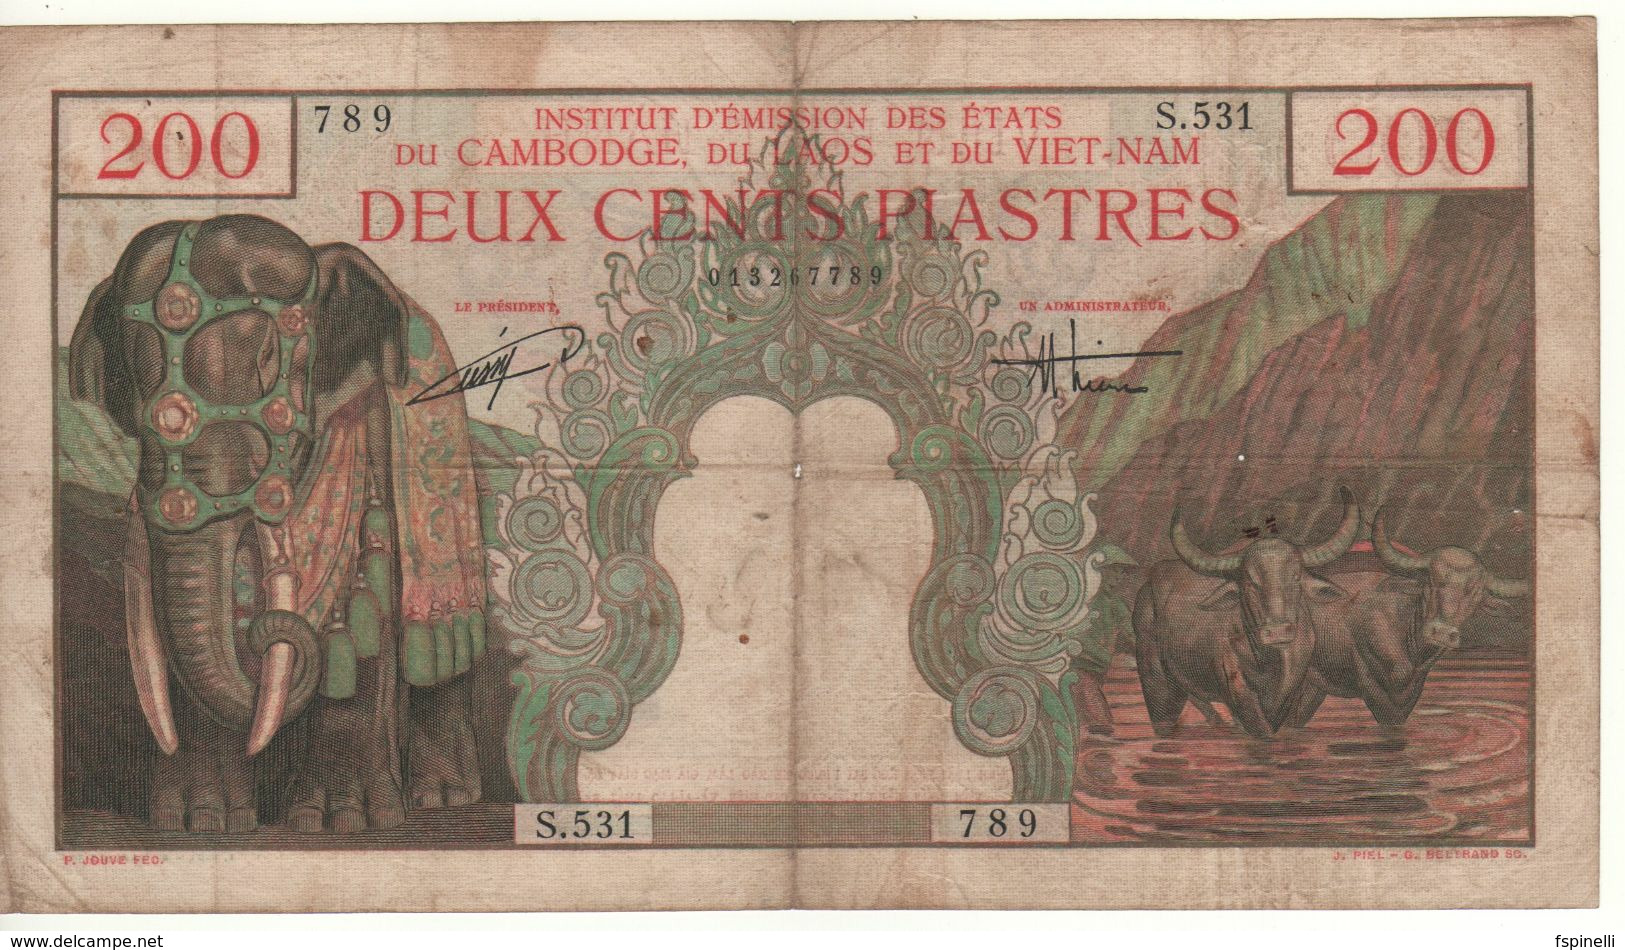 FRENCH INDOCHINA   200  Piastres  / Đồng / Riels / Kip    P109   ( Vietnam   ND - 1953 ) - Indochina